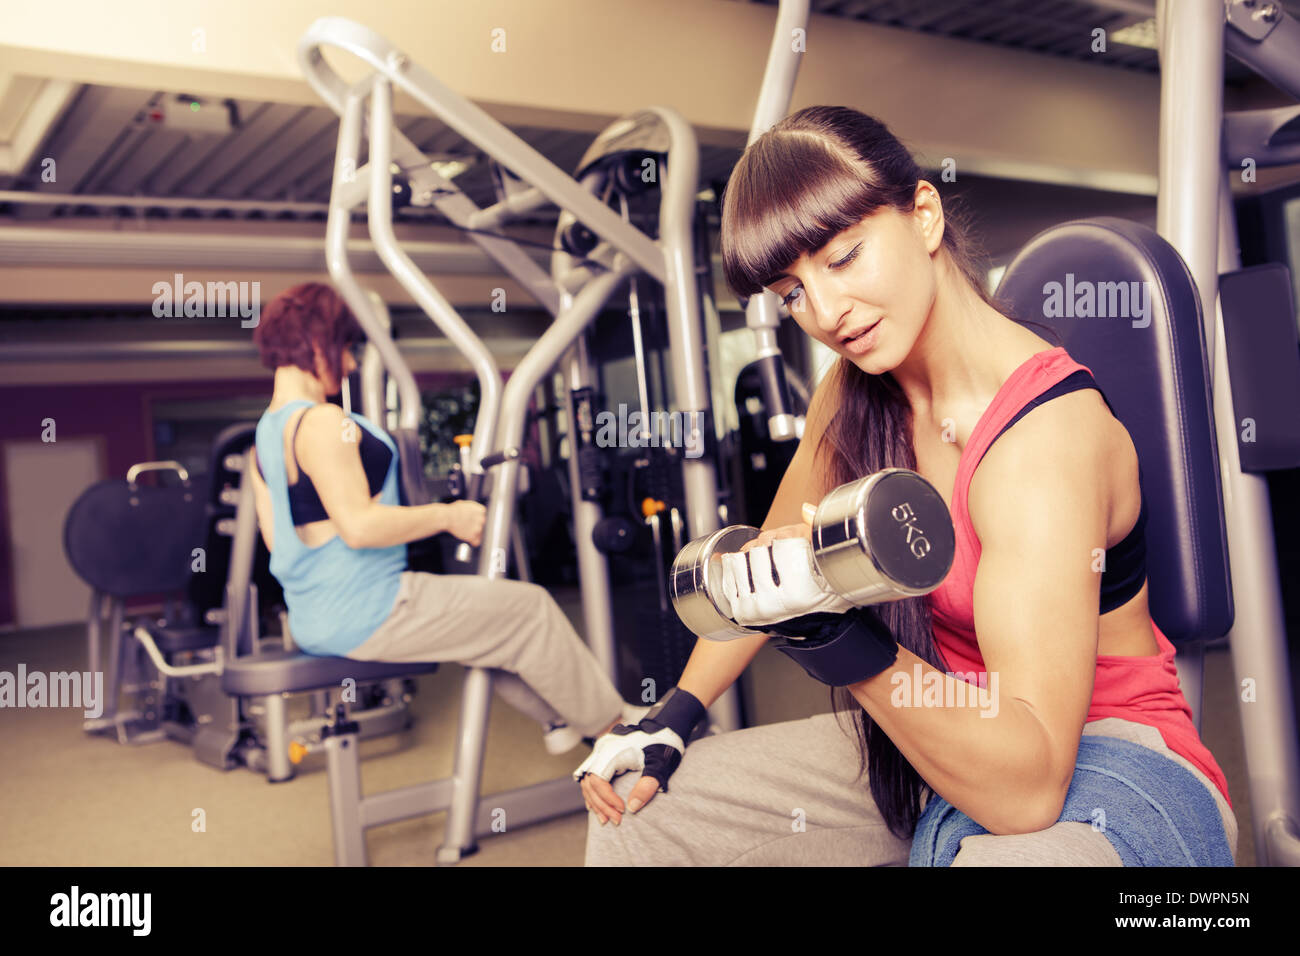 young woman in sport dress in a gym room Stock Photo